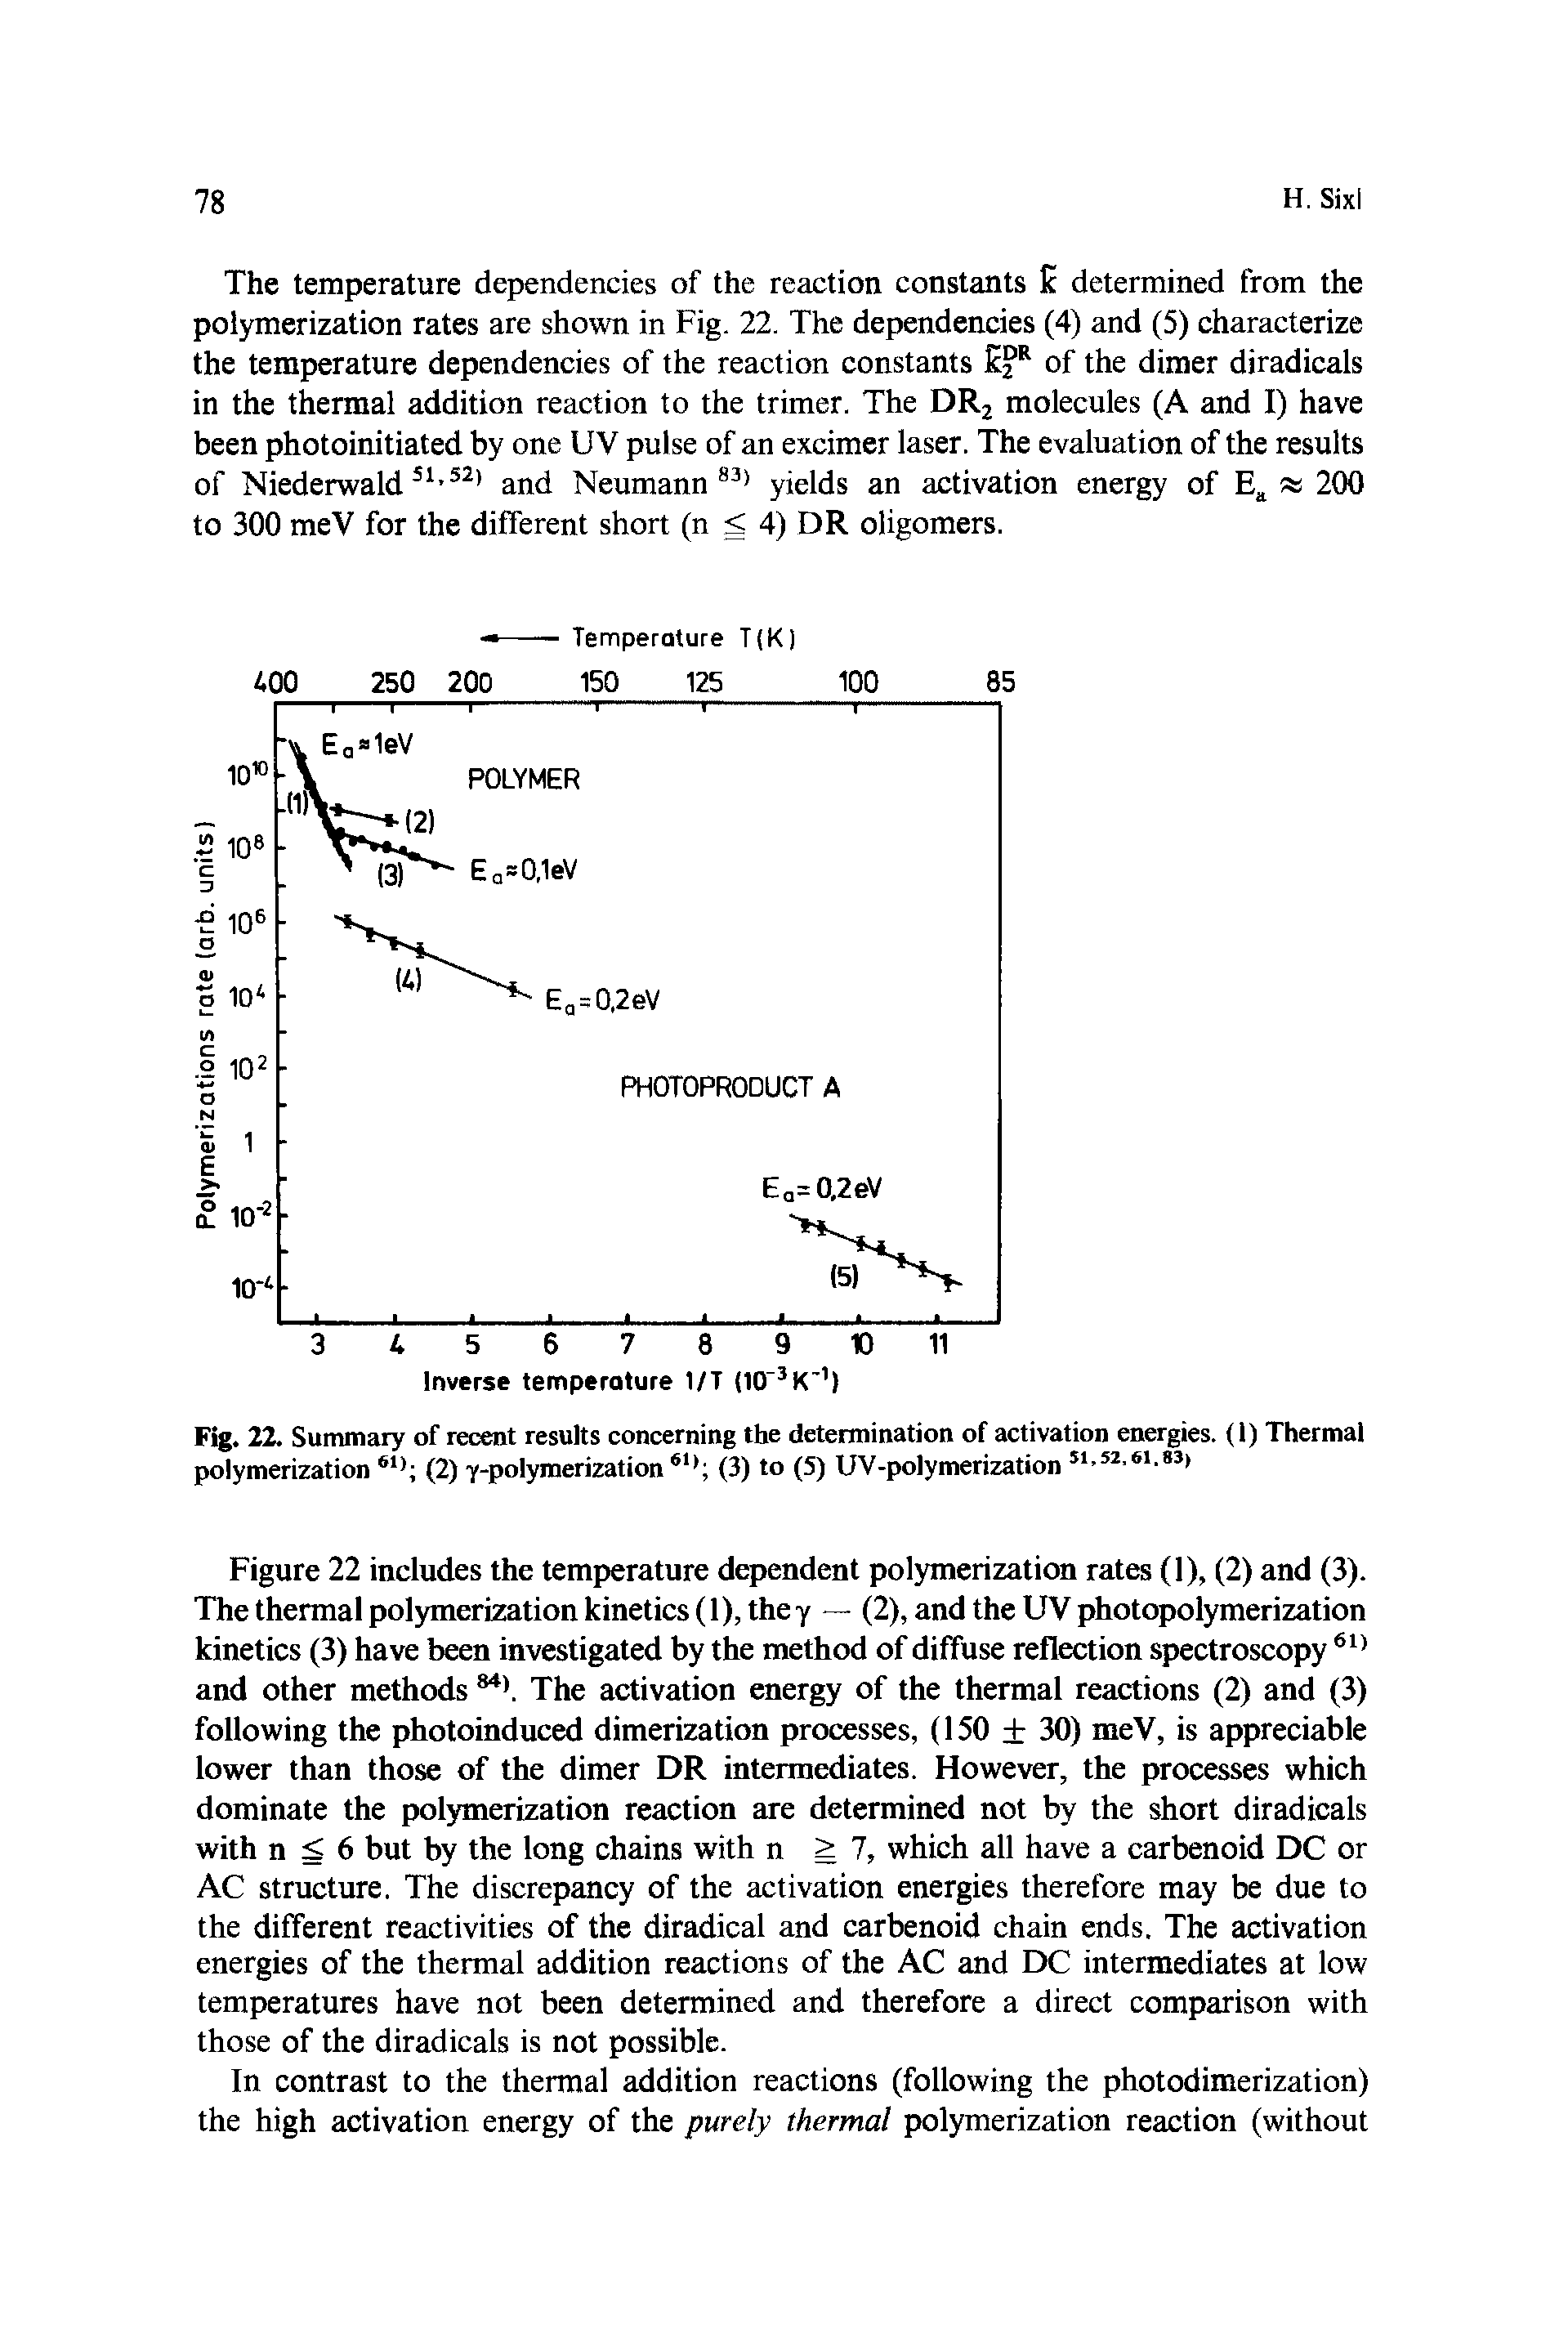 Fig. 22. Summary of recent results concerning the determination of activation energies. (I) Thermal polymerization (2) 7-polymerization (3) to (5) UV-polymerization...